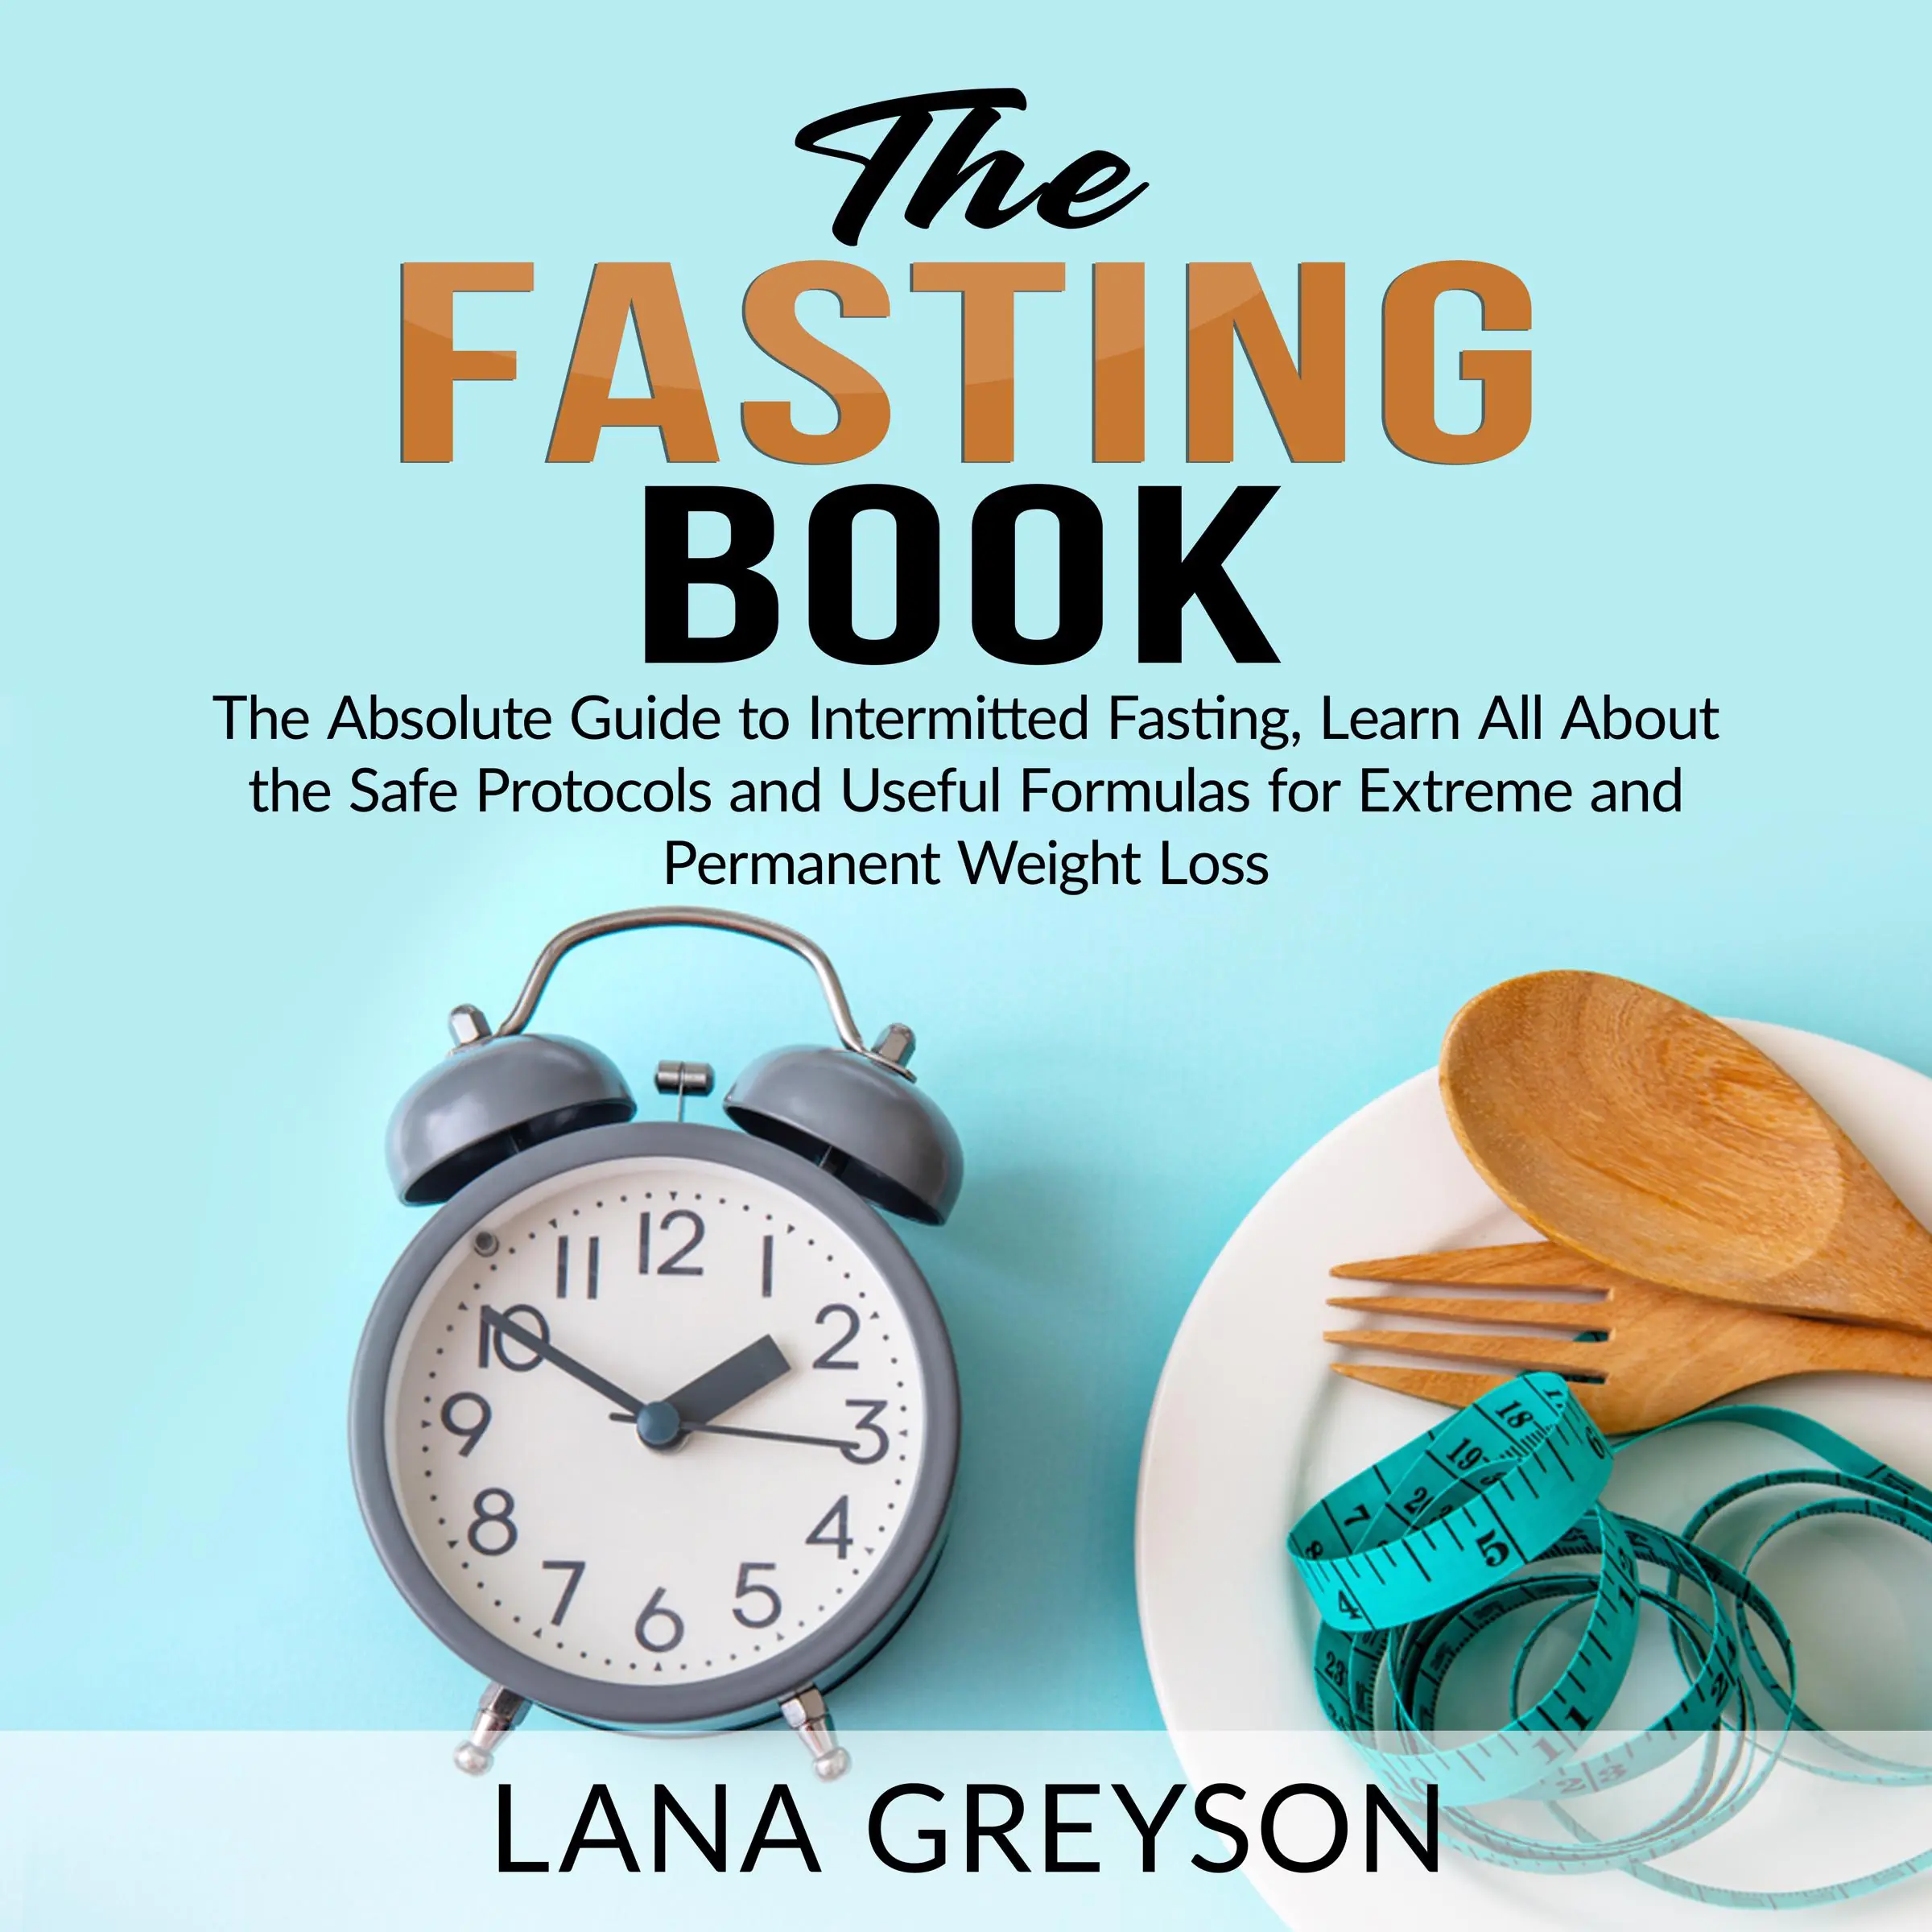 The Fasting Book: The Absolute Guide to Intermittent Fasting, Learn All About the Safe Protocols and Useful Formulas for Extreme and Permanent Weight Loss Audiobook by Lana Greyson